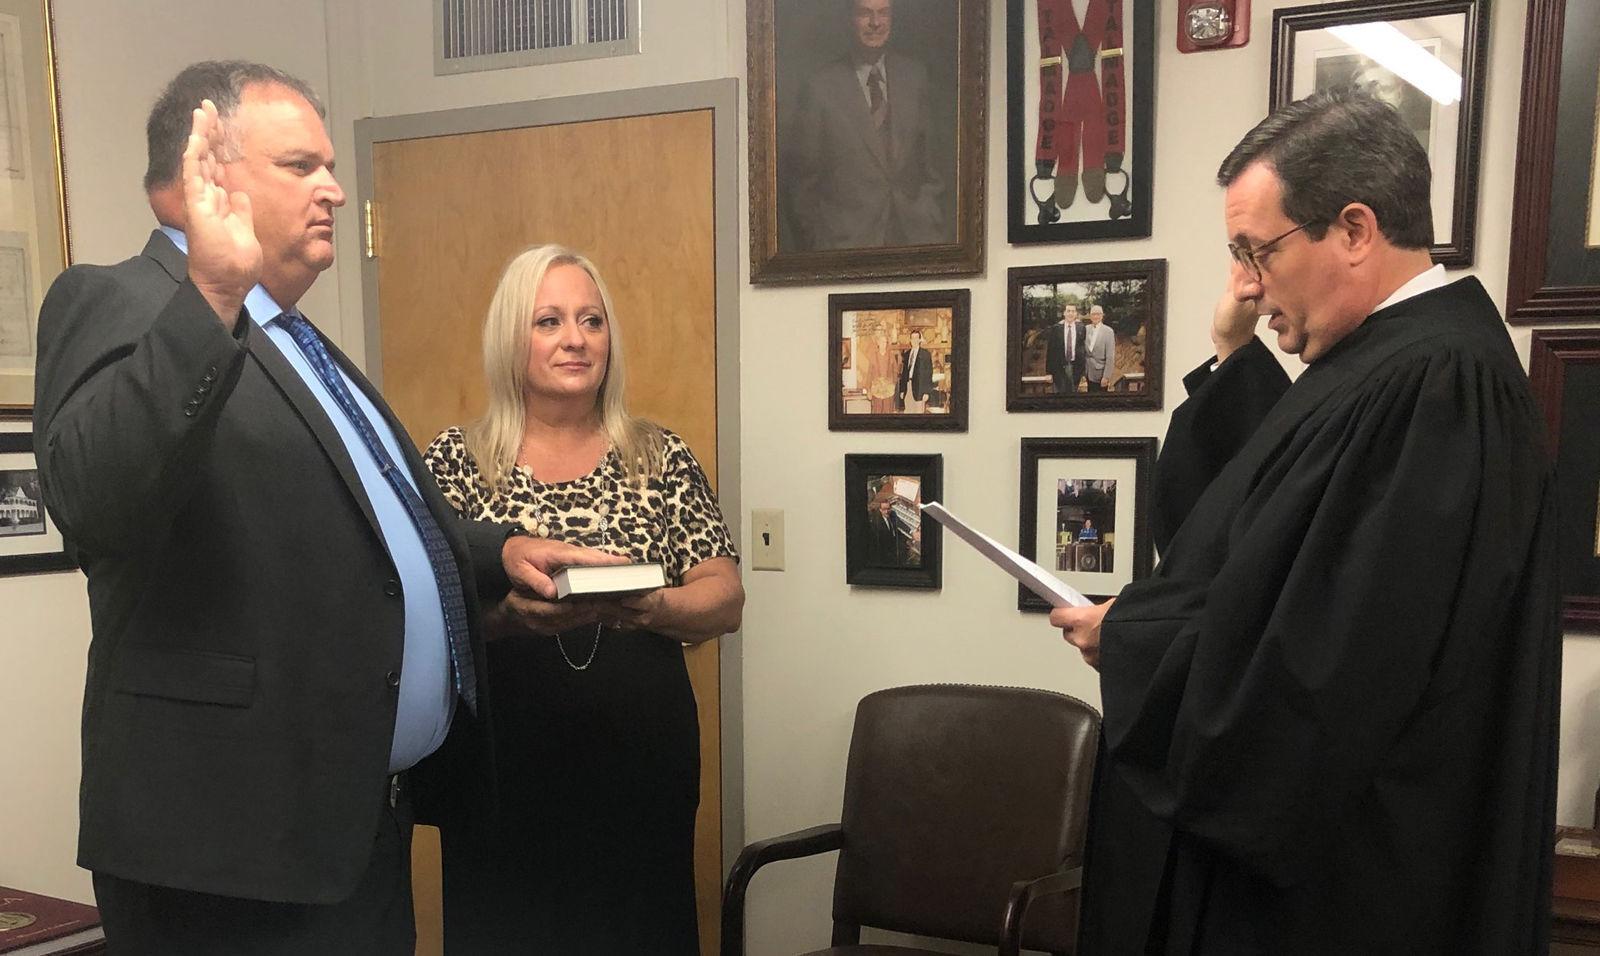 New magistrate in Haralson County after former judge resigns Local